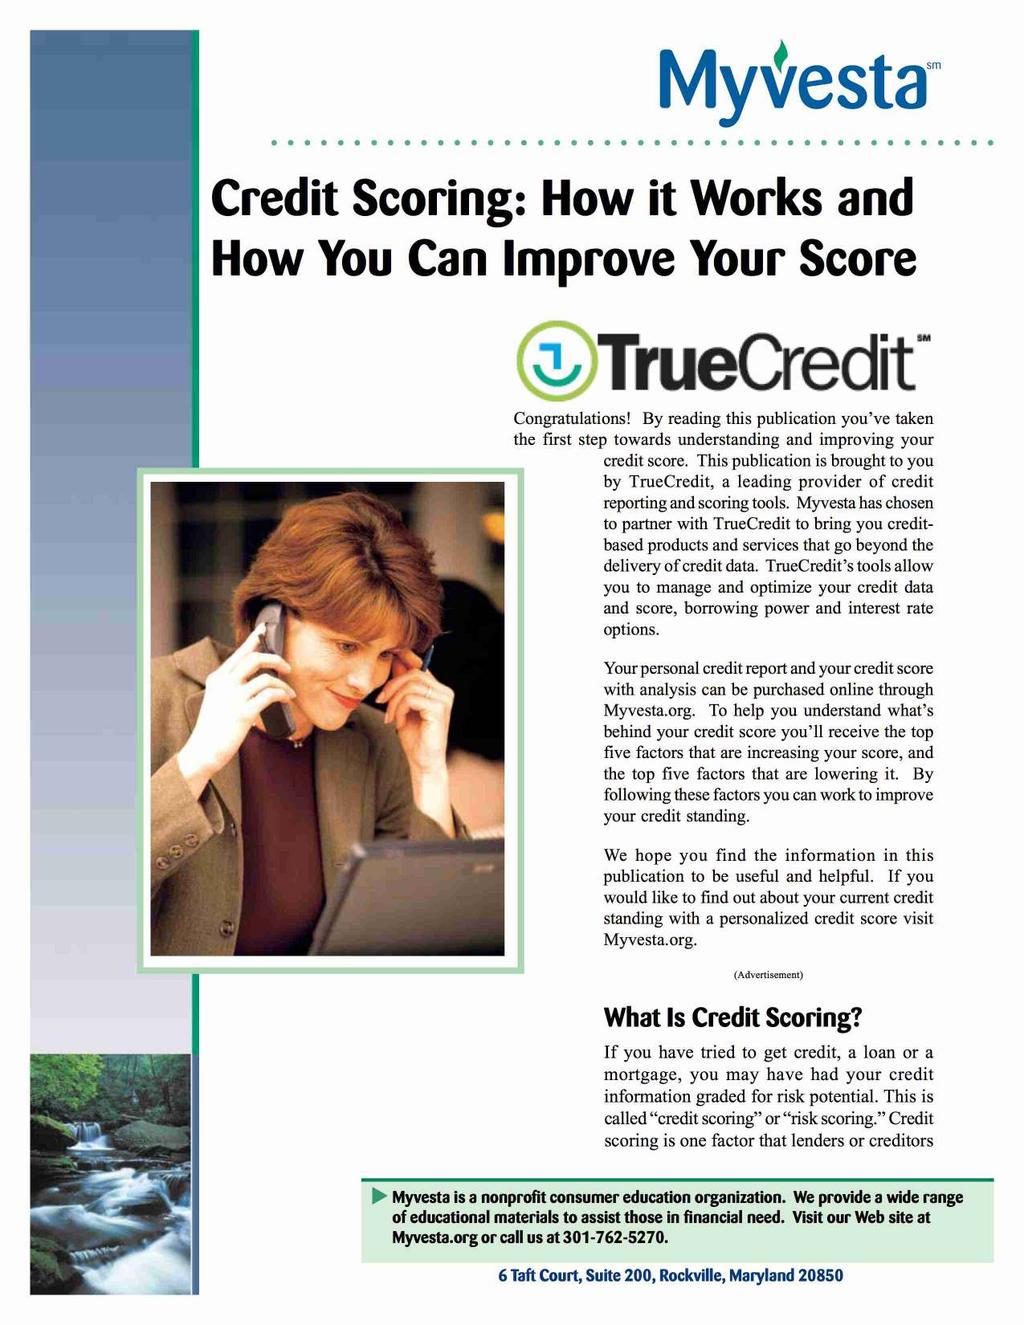 ves a Credit Scoring: How it Works and How You Can Improve Your Score rue re i Congratulations!